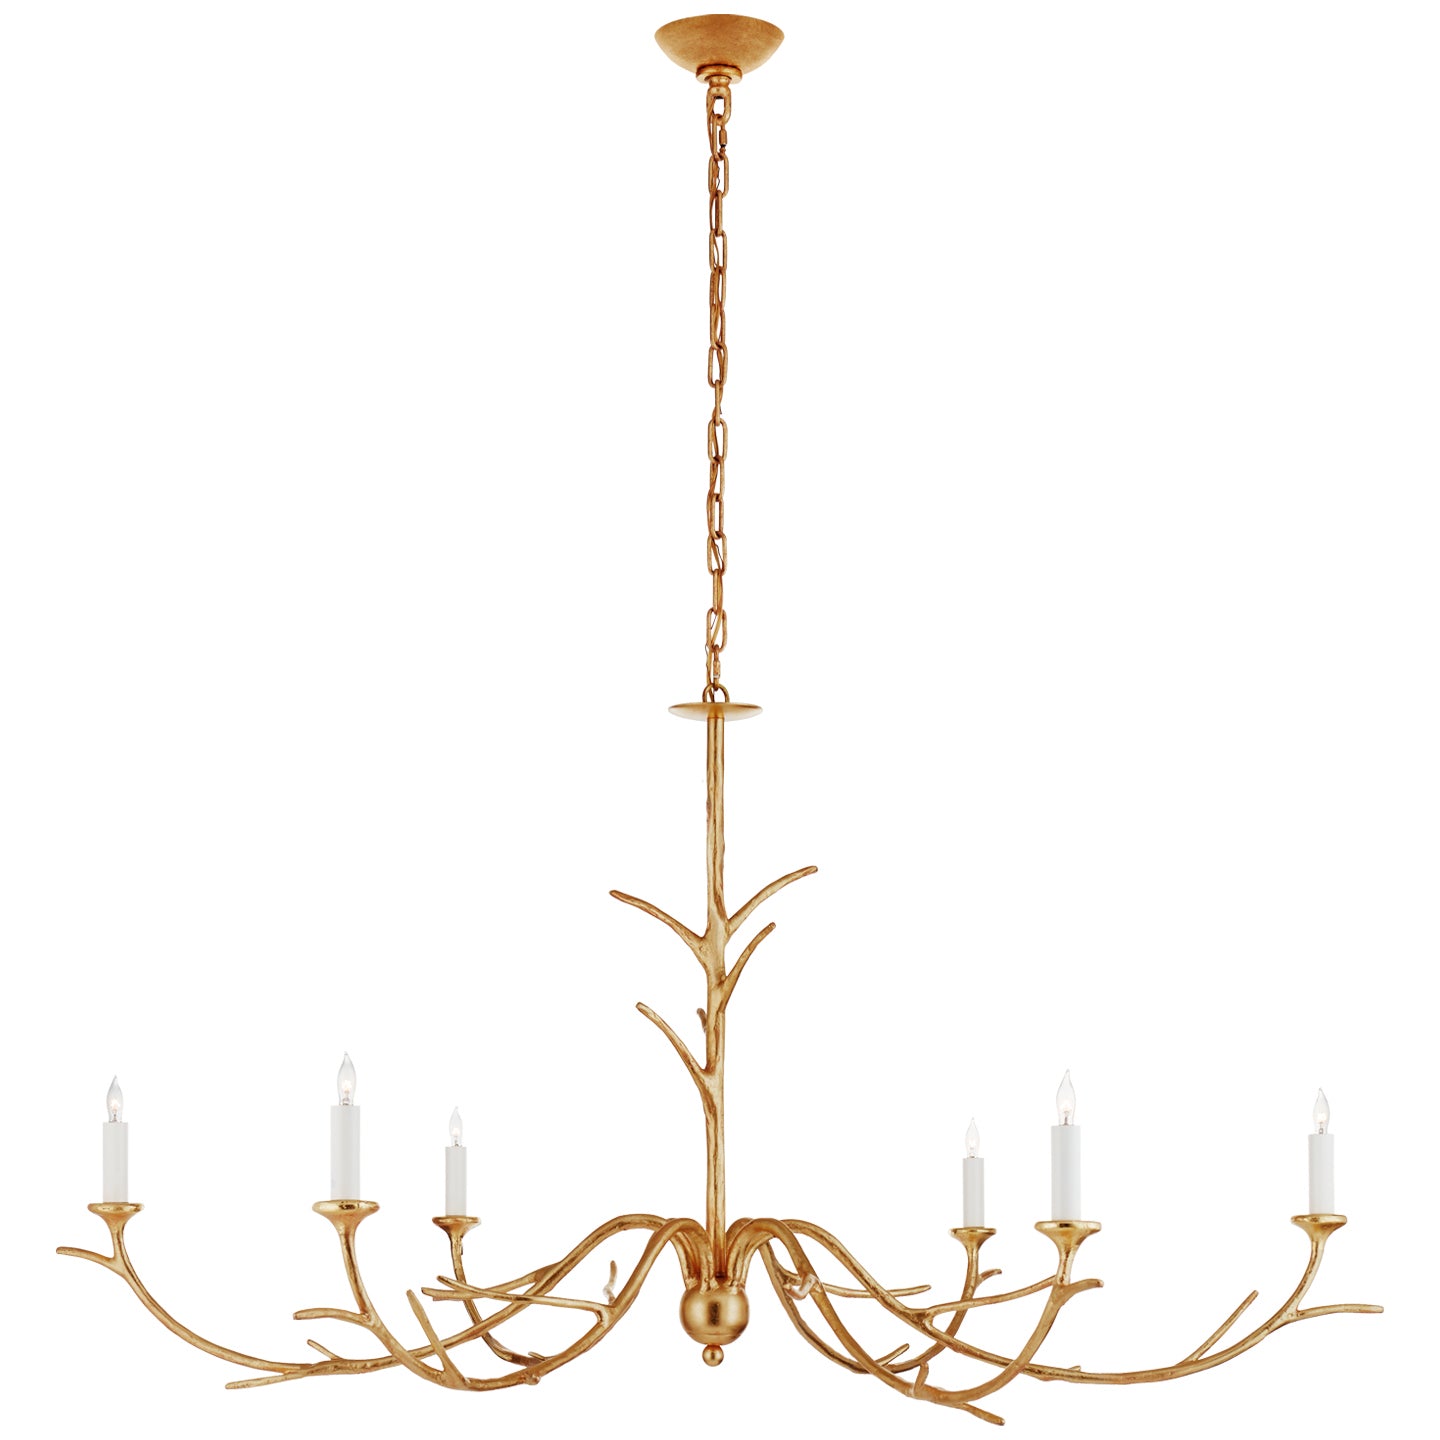 Load image into Gallery viewer, Visual Comfort Signature - JN 5076AGL - Six Light Chandelier - Iberia - Antique Gold Leaf
